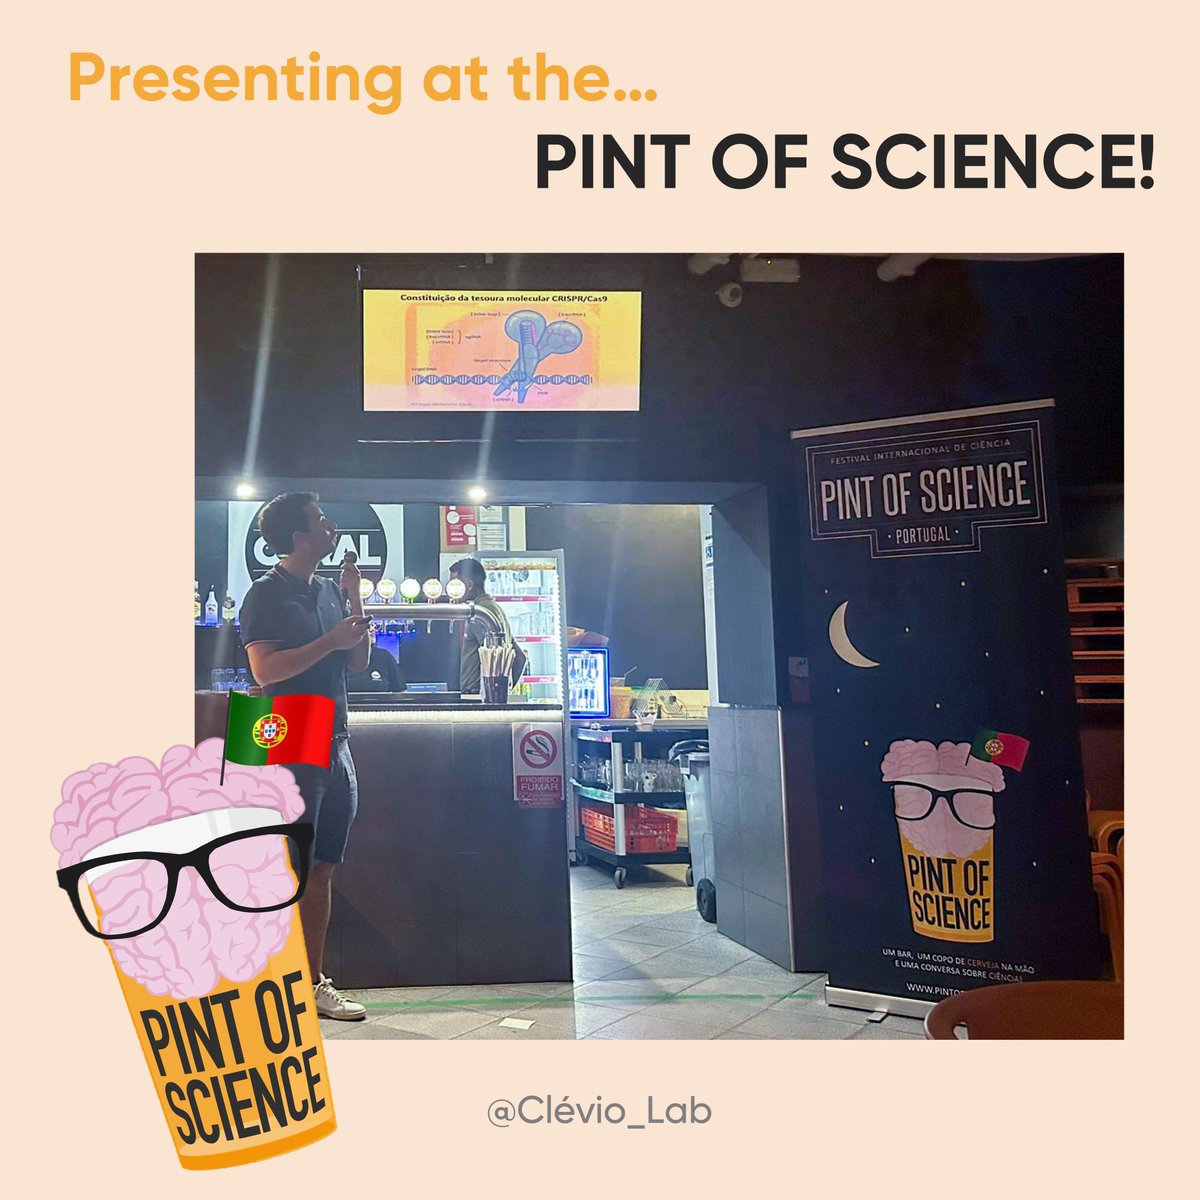 🍻🔬 Ricardo had the honor of presenting at @pintofsciencePT giving an exciting talk on CRISPR, a genetic engineering tool that we use in the lab. 🧬✨
Thanks for the opportunity! 🙌
#PintOfScience #CRISPR #GeneticEngineering #ScienceInThePub #PublicScience  #ScienceFestival